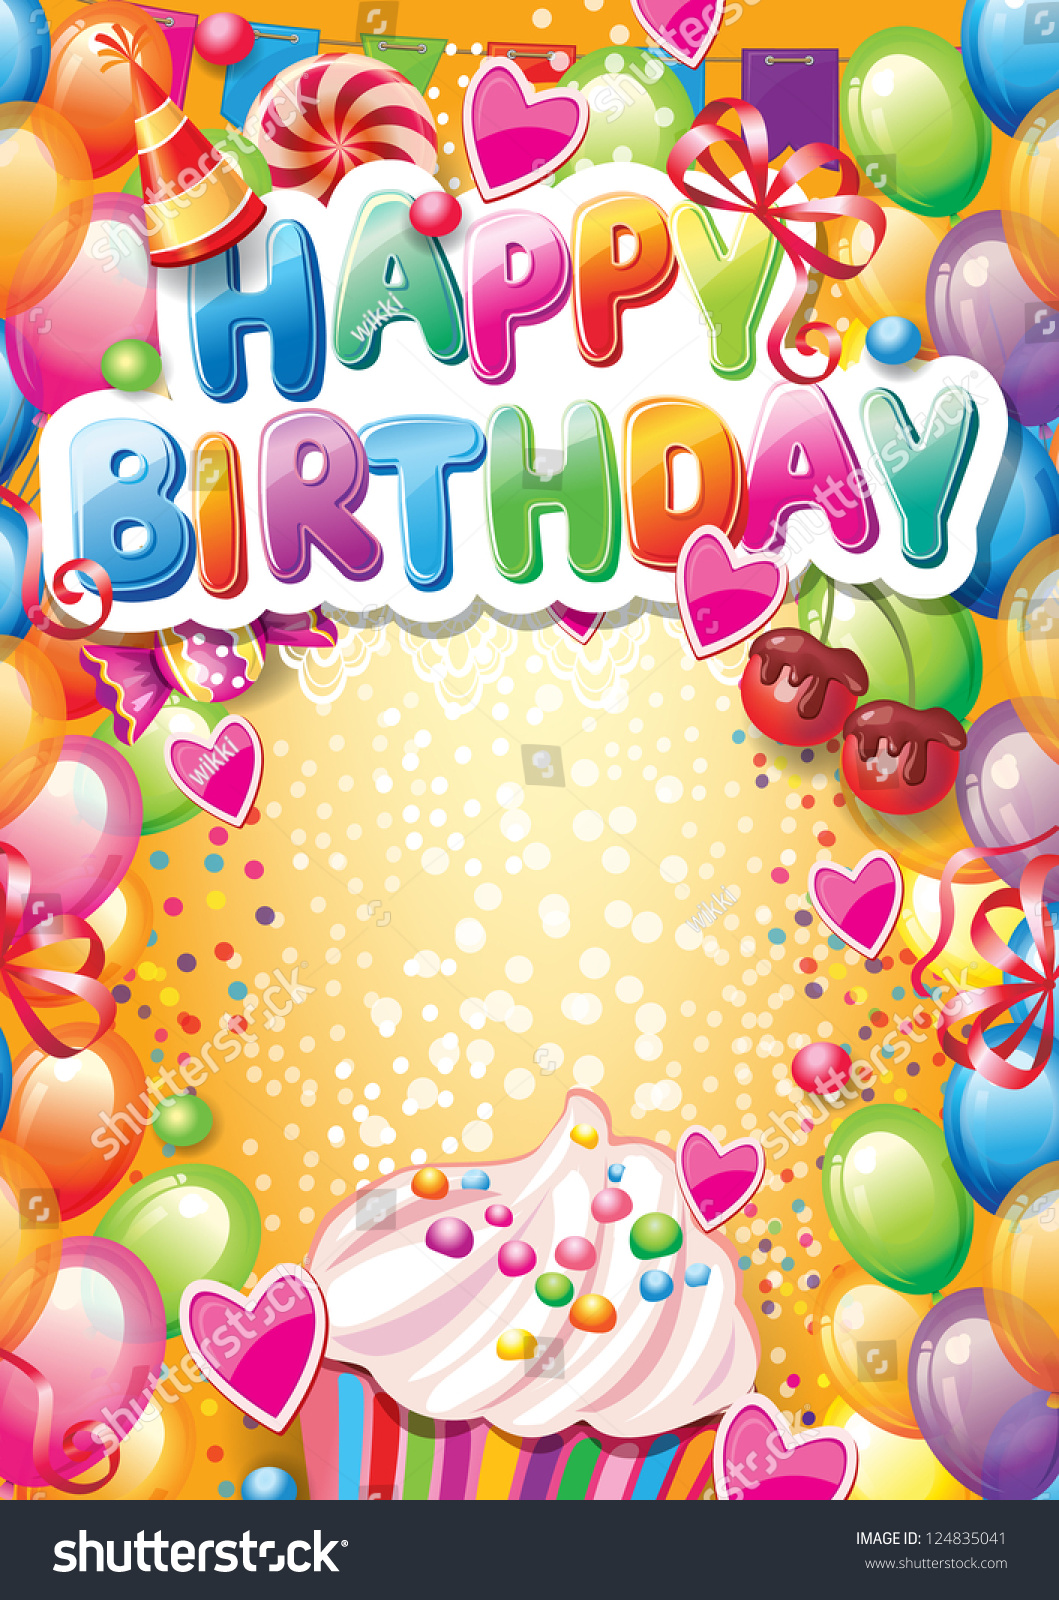 Template For Happy Birthday Card With Place For Text Stock Vector ...